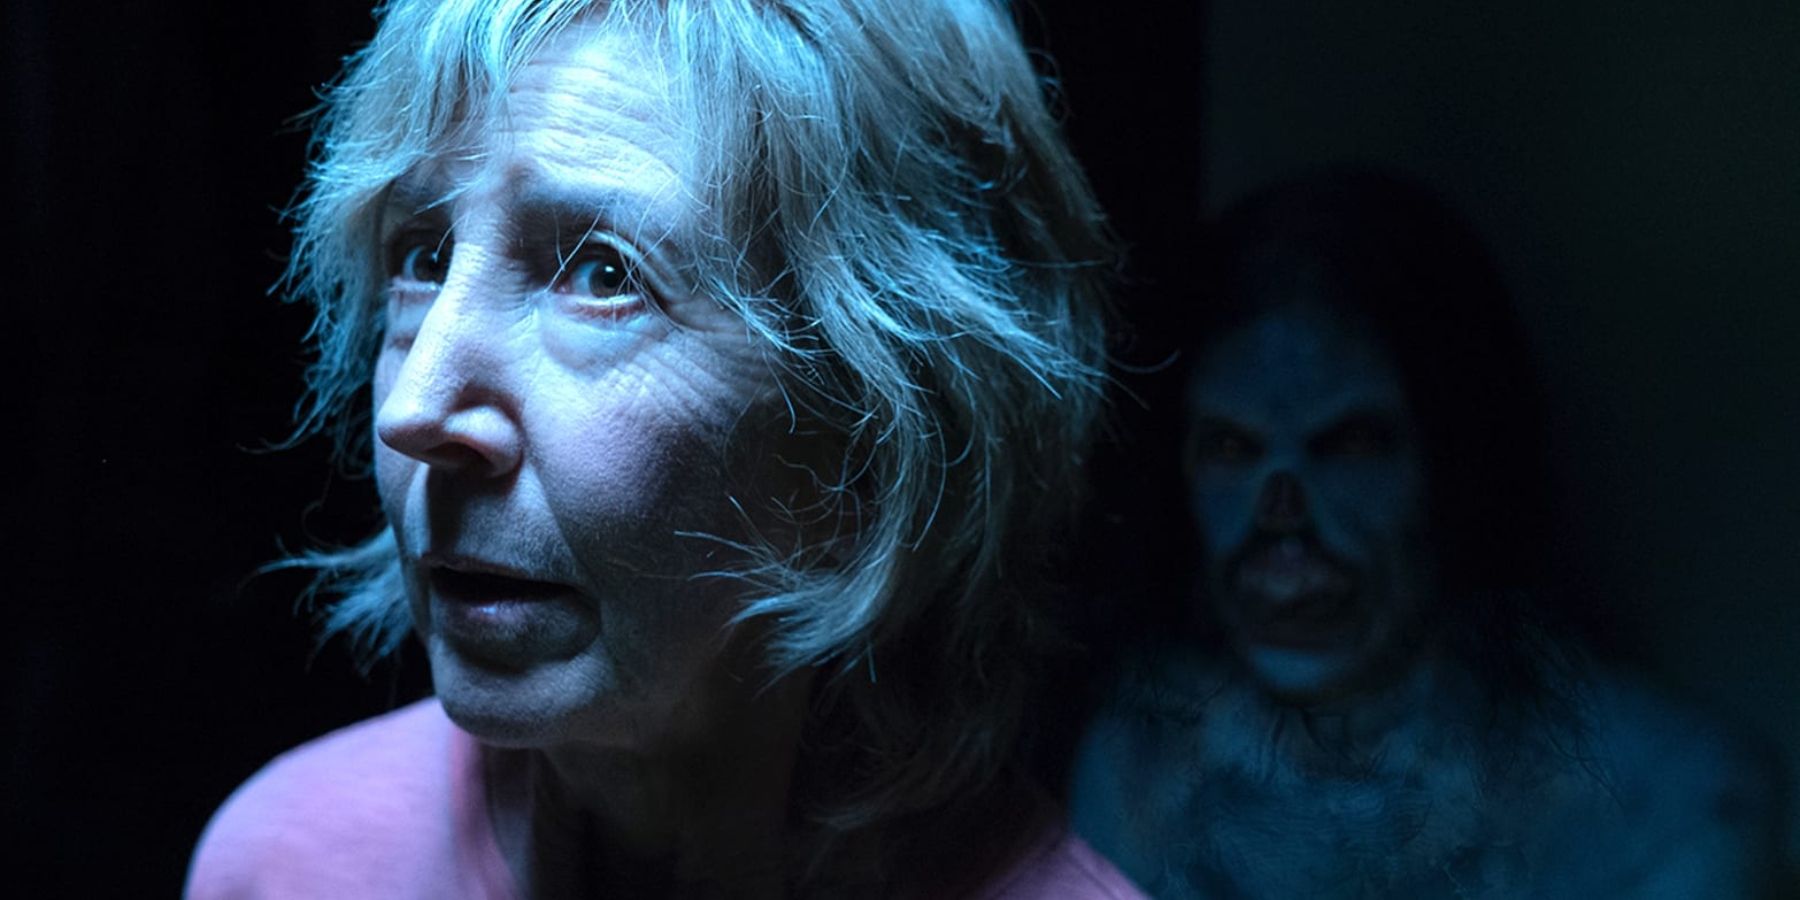 Elise Rainer in Insidious with a demon behind her